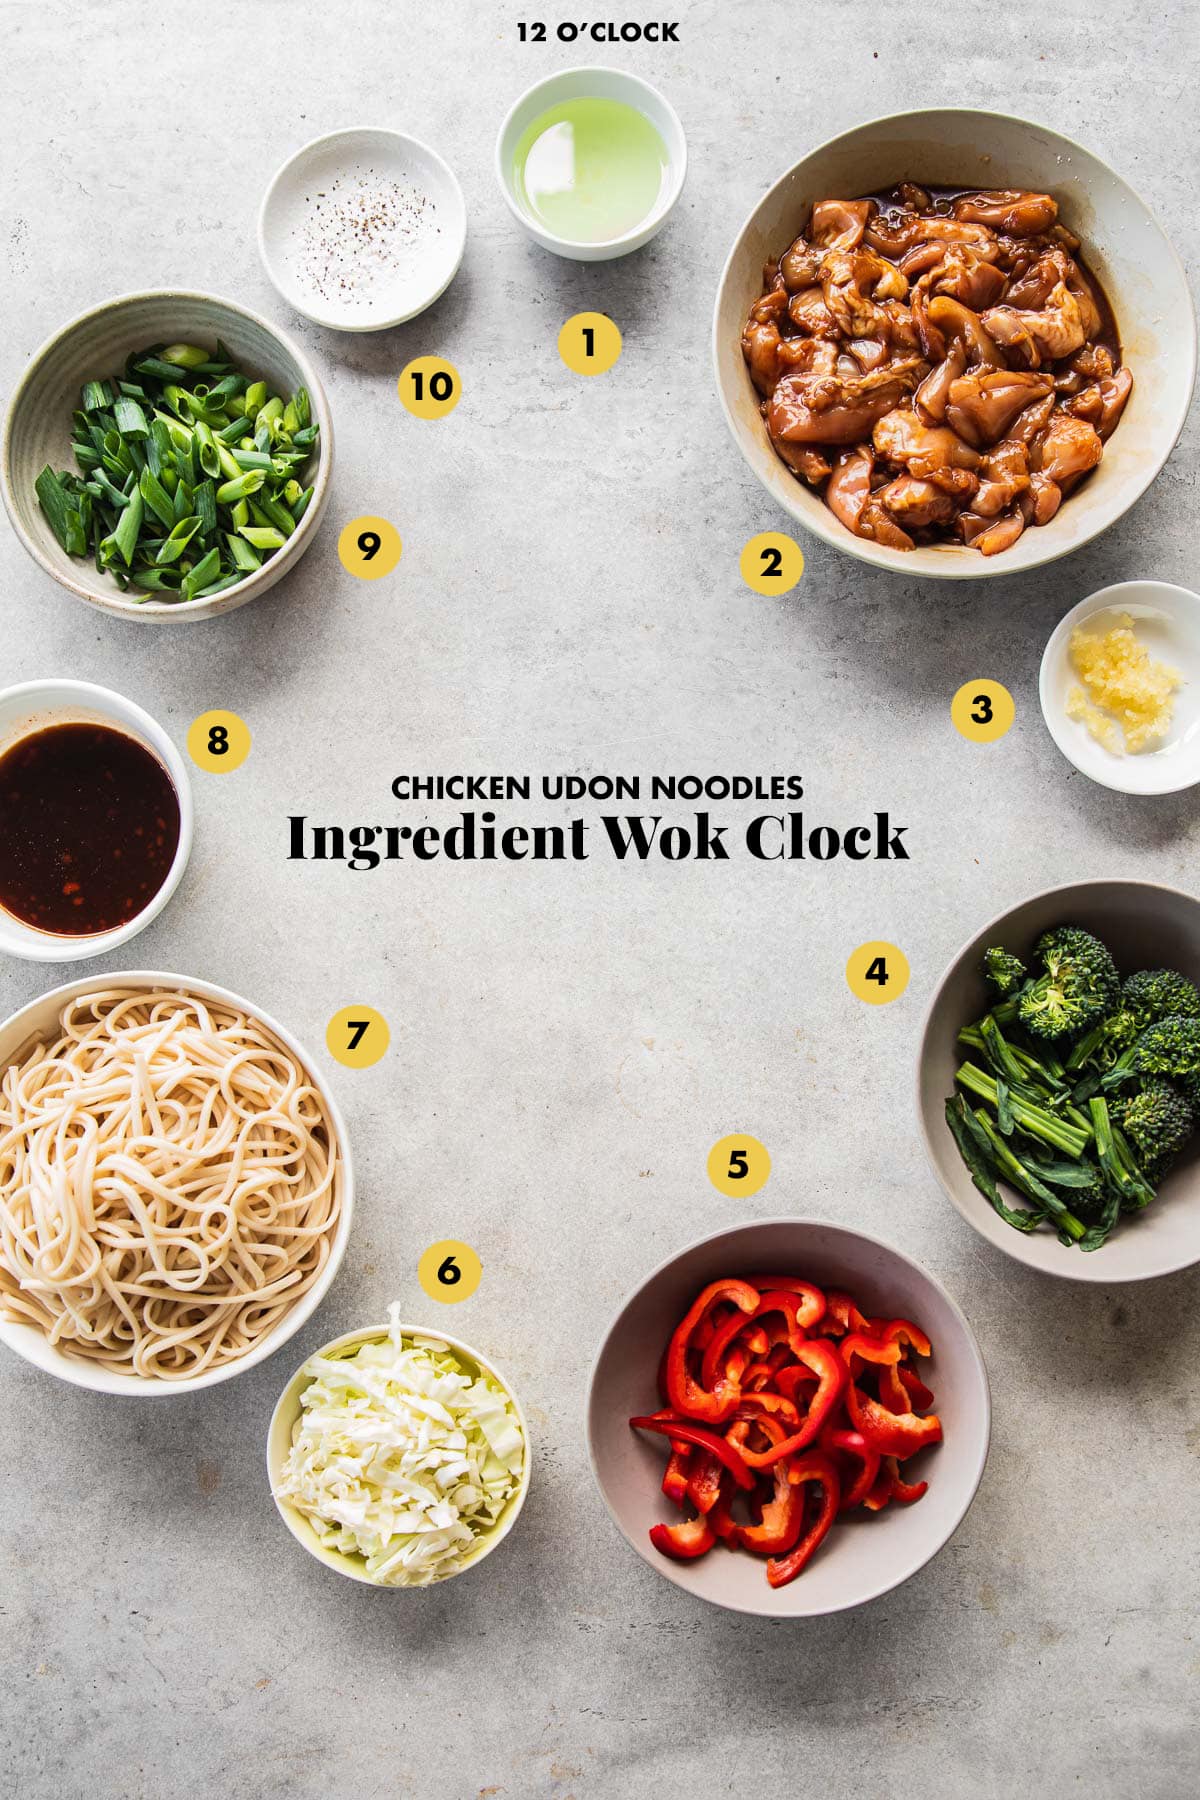 Chicken Udon Noodle Ingredient Wok Clock where ingredients are laid out in clock formation and the order in which they are added to the wok, starting at 12 o'clock.